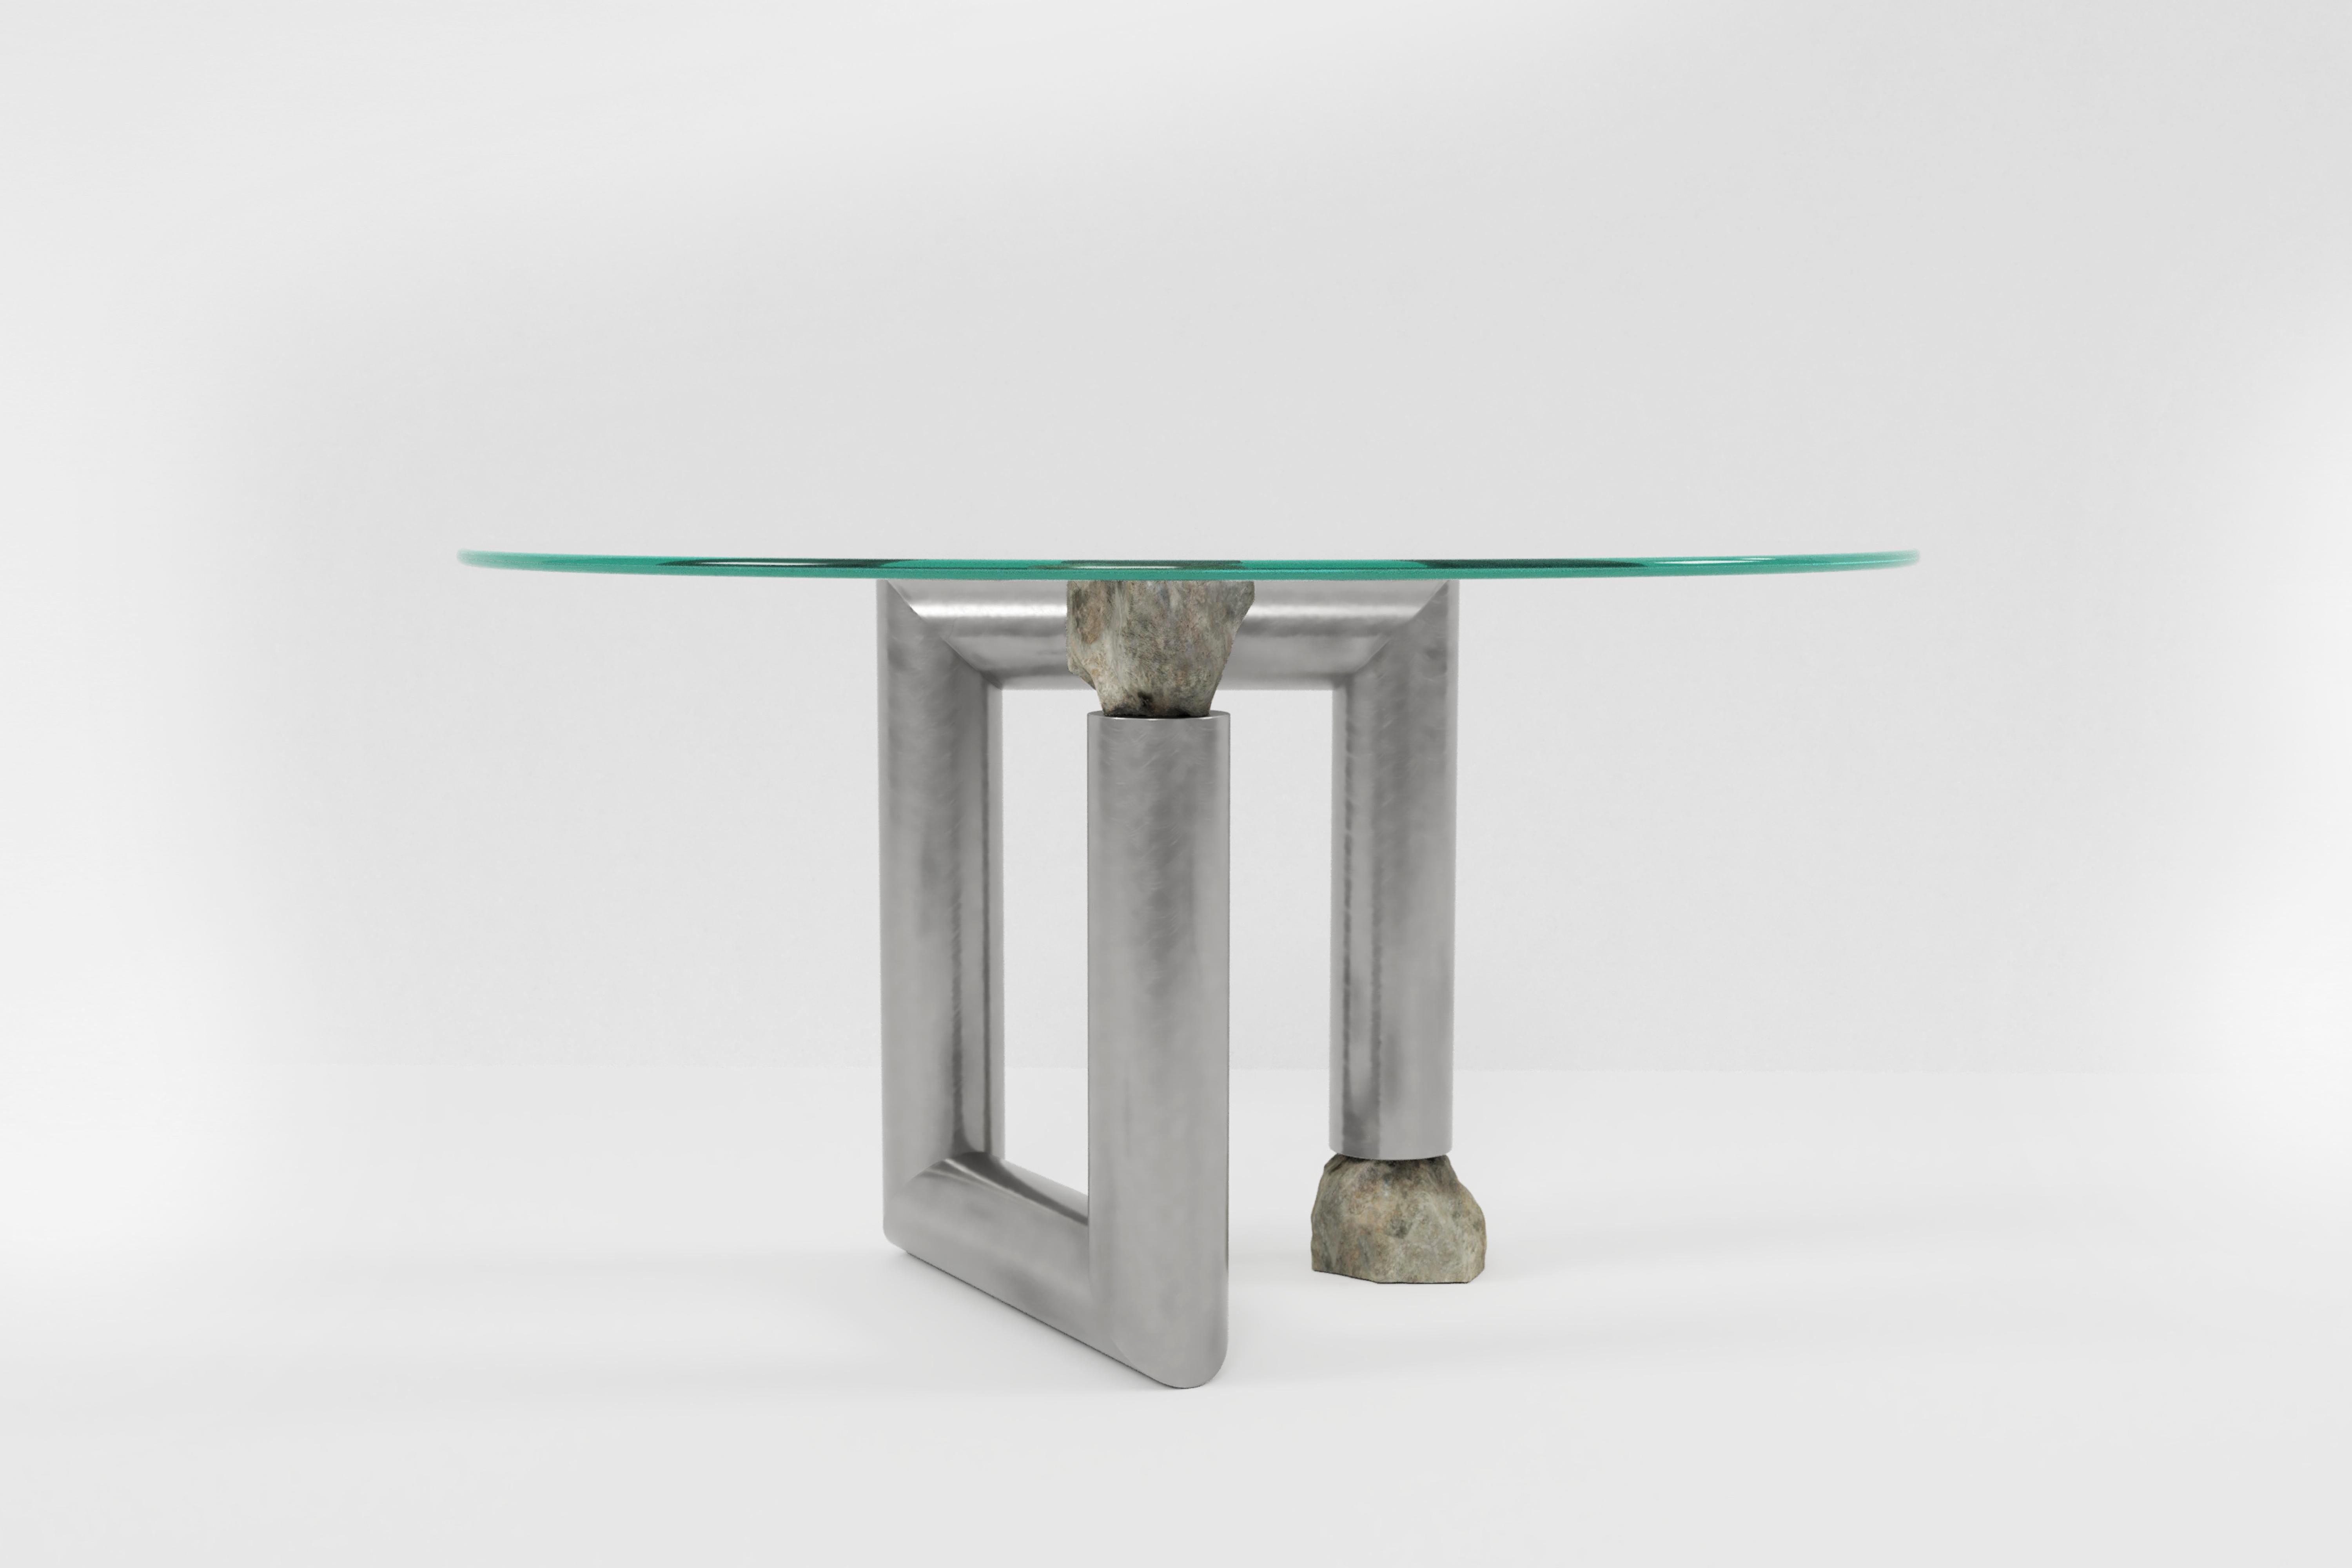 Round stainless steel dining table by Batten and Kamp
Limited edition of 24 + 3 AP.
Dimensions: Diameter 140 x H 73 cm 
Materials: Hand-brushed stainless steel, toughed glass, granite stone.

The top can be made to the buyer's preference.

Batten